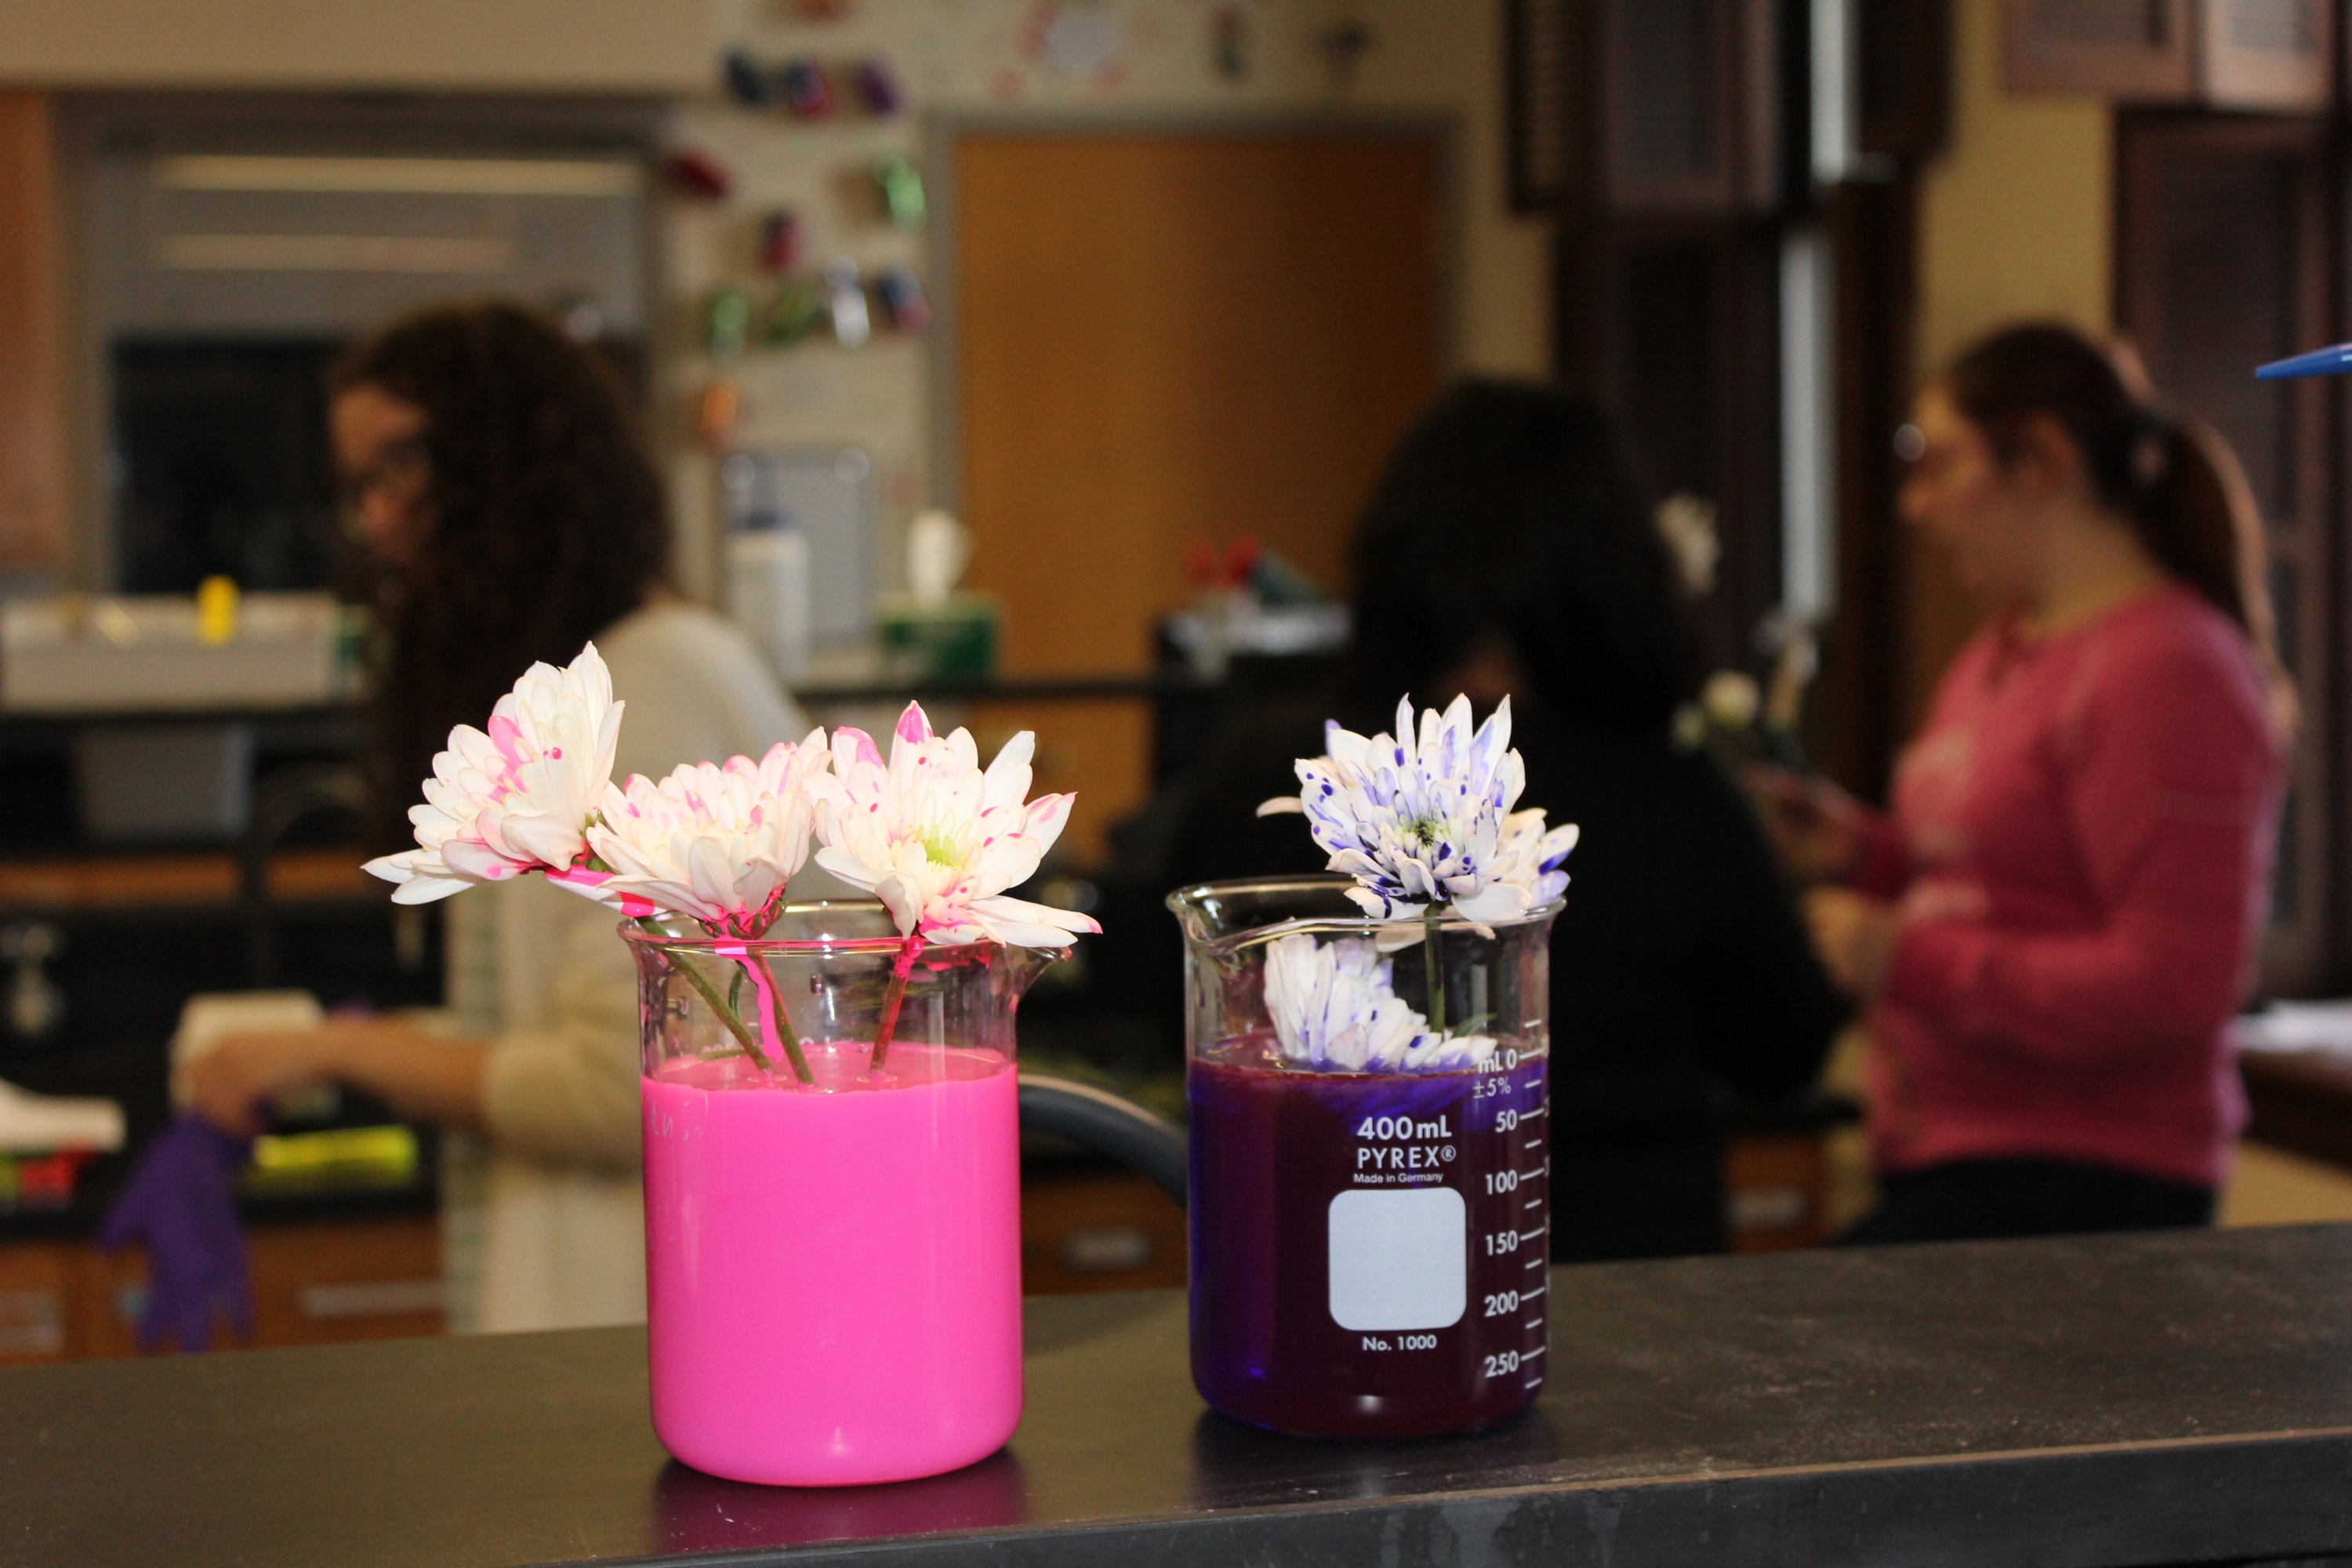 The Valentine's Day lab hosted by the chemistry club allowed students to color their own carnations using highlighter ink and food dye.